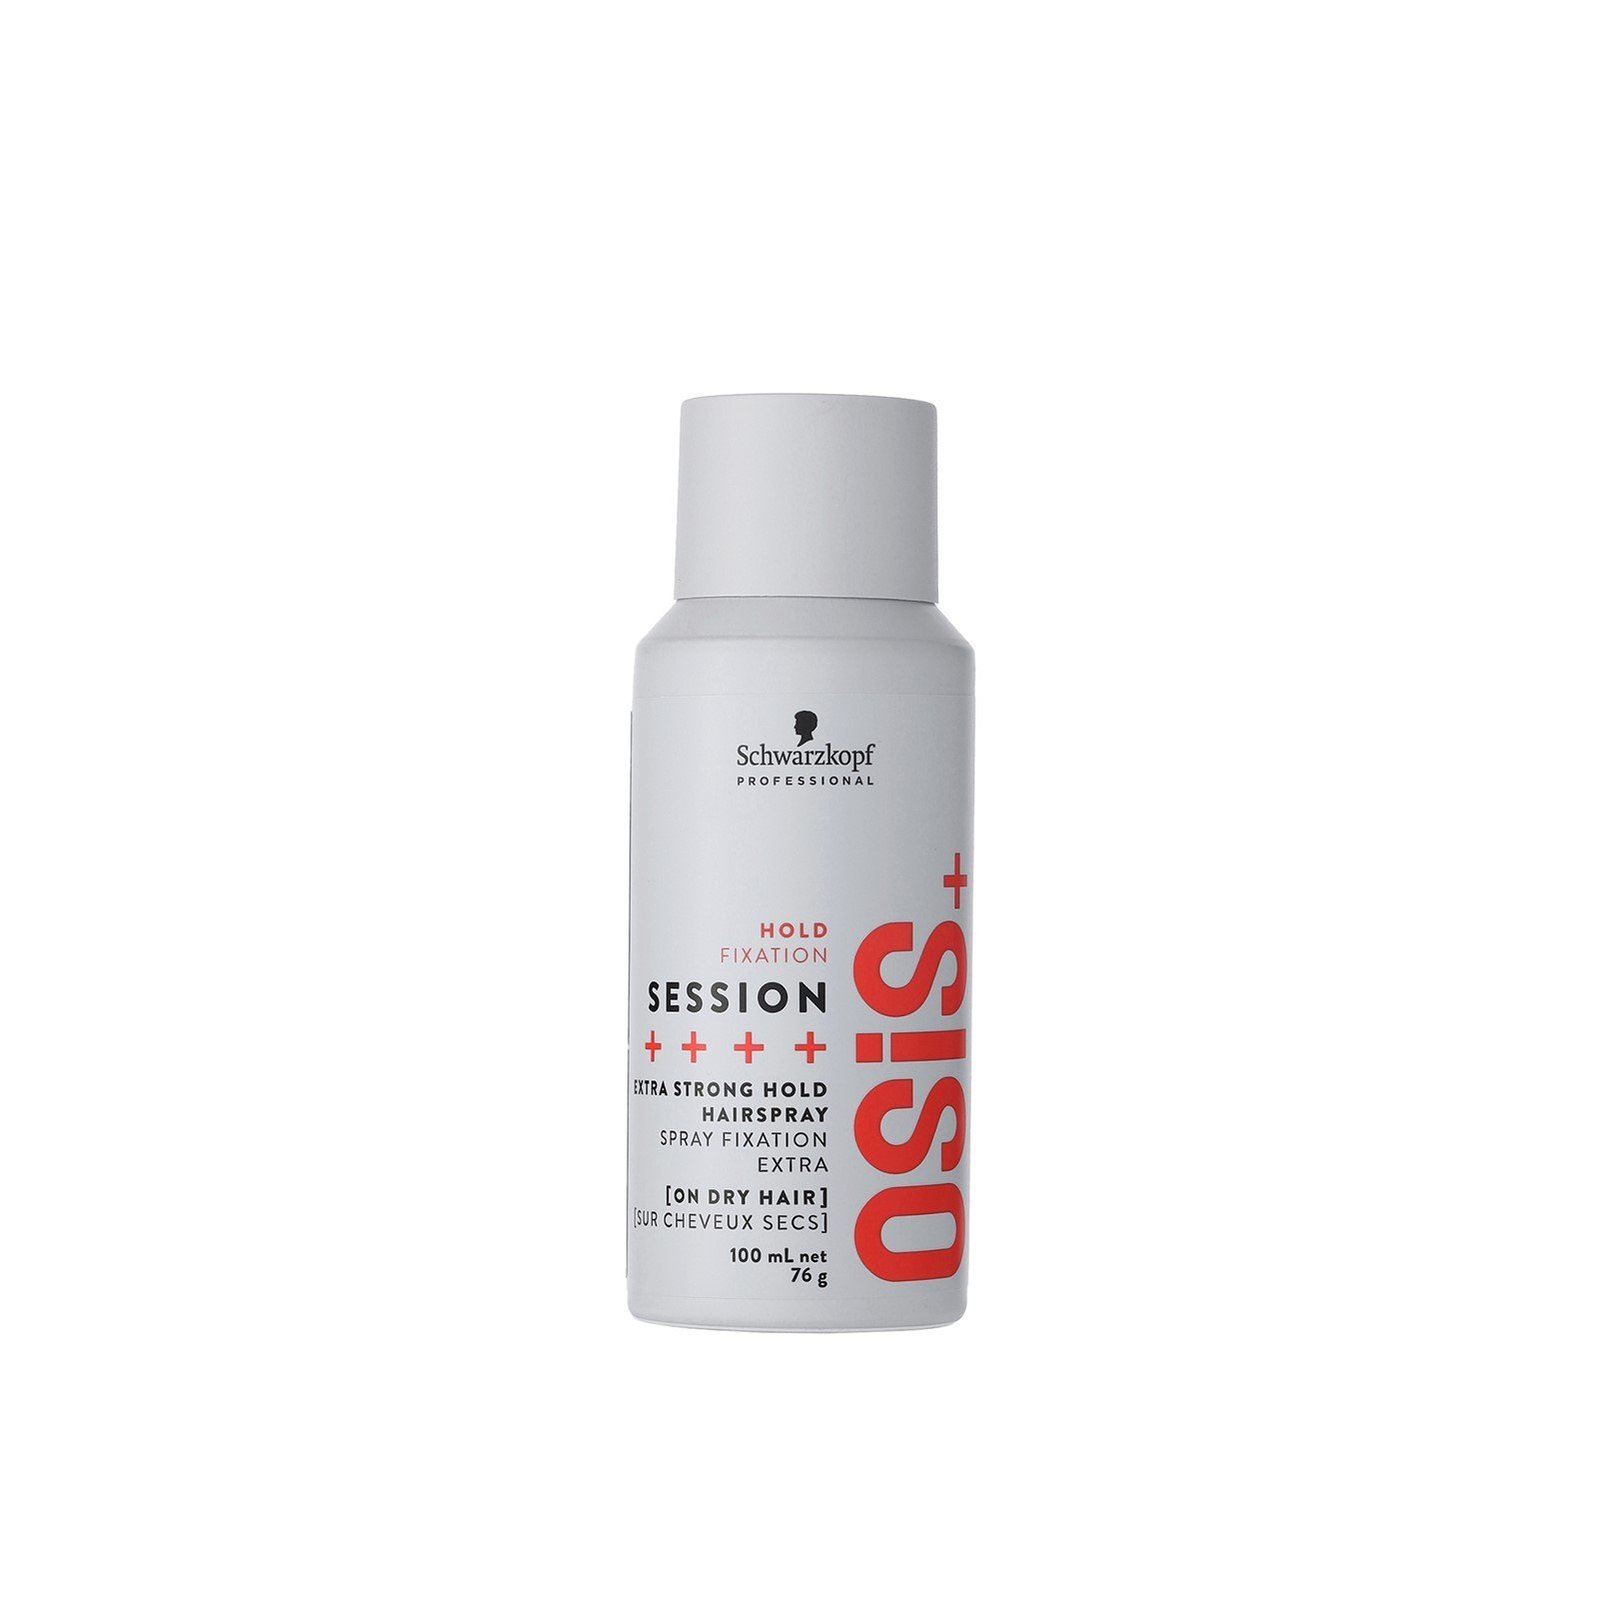 Schwarzkopf OSiS+ Session Extra Strong Hold Hairspray 100ml (76g)